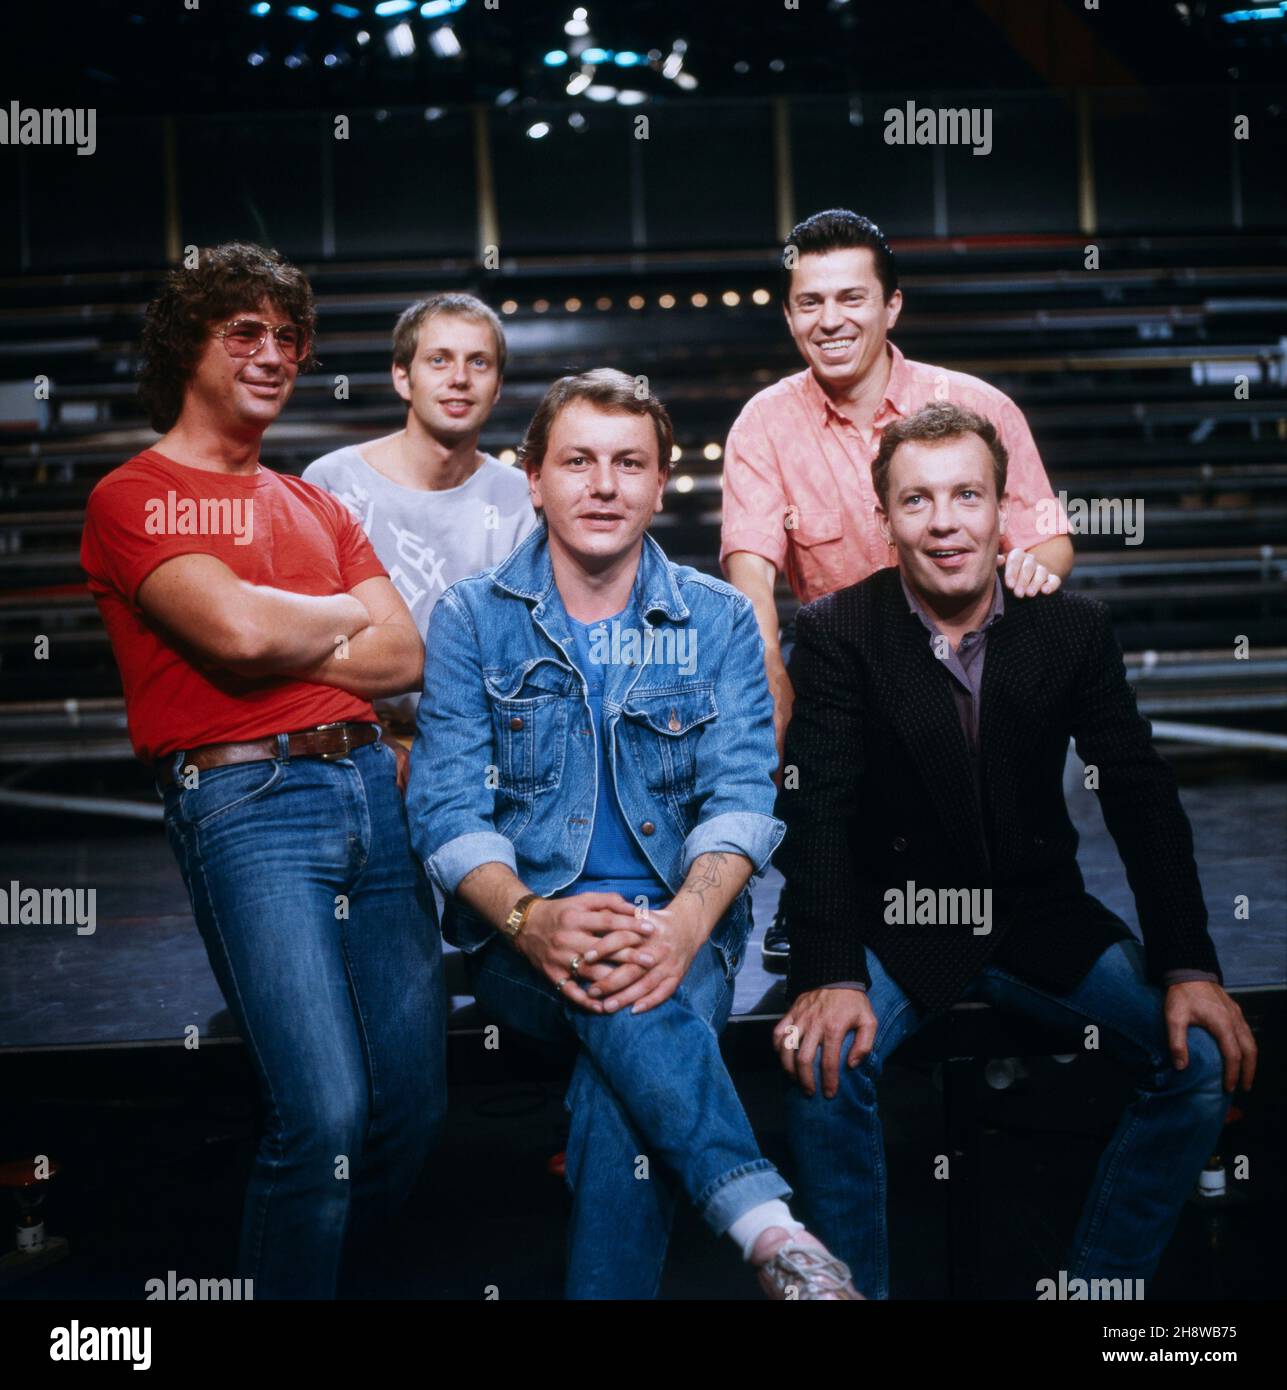 Spider Murphy Gang, Münchner Rock 'n' Roll Band, circa 1986. Spider Murphy Gang, Munich Rock 'n' Roll band, circa 1986. Stock Photo